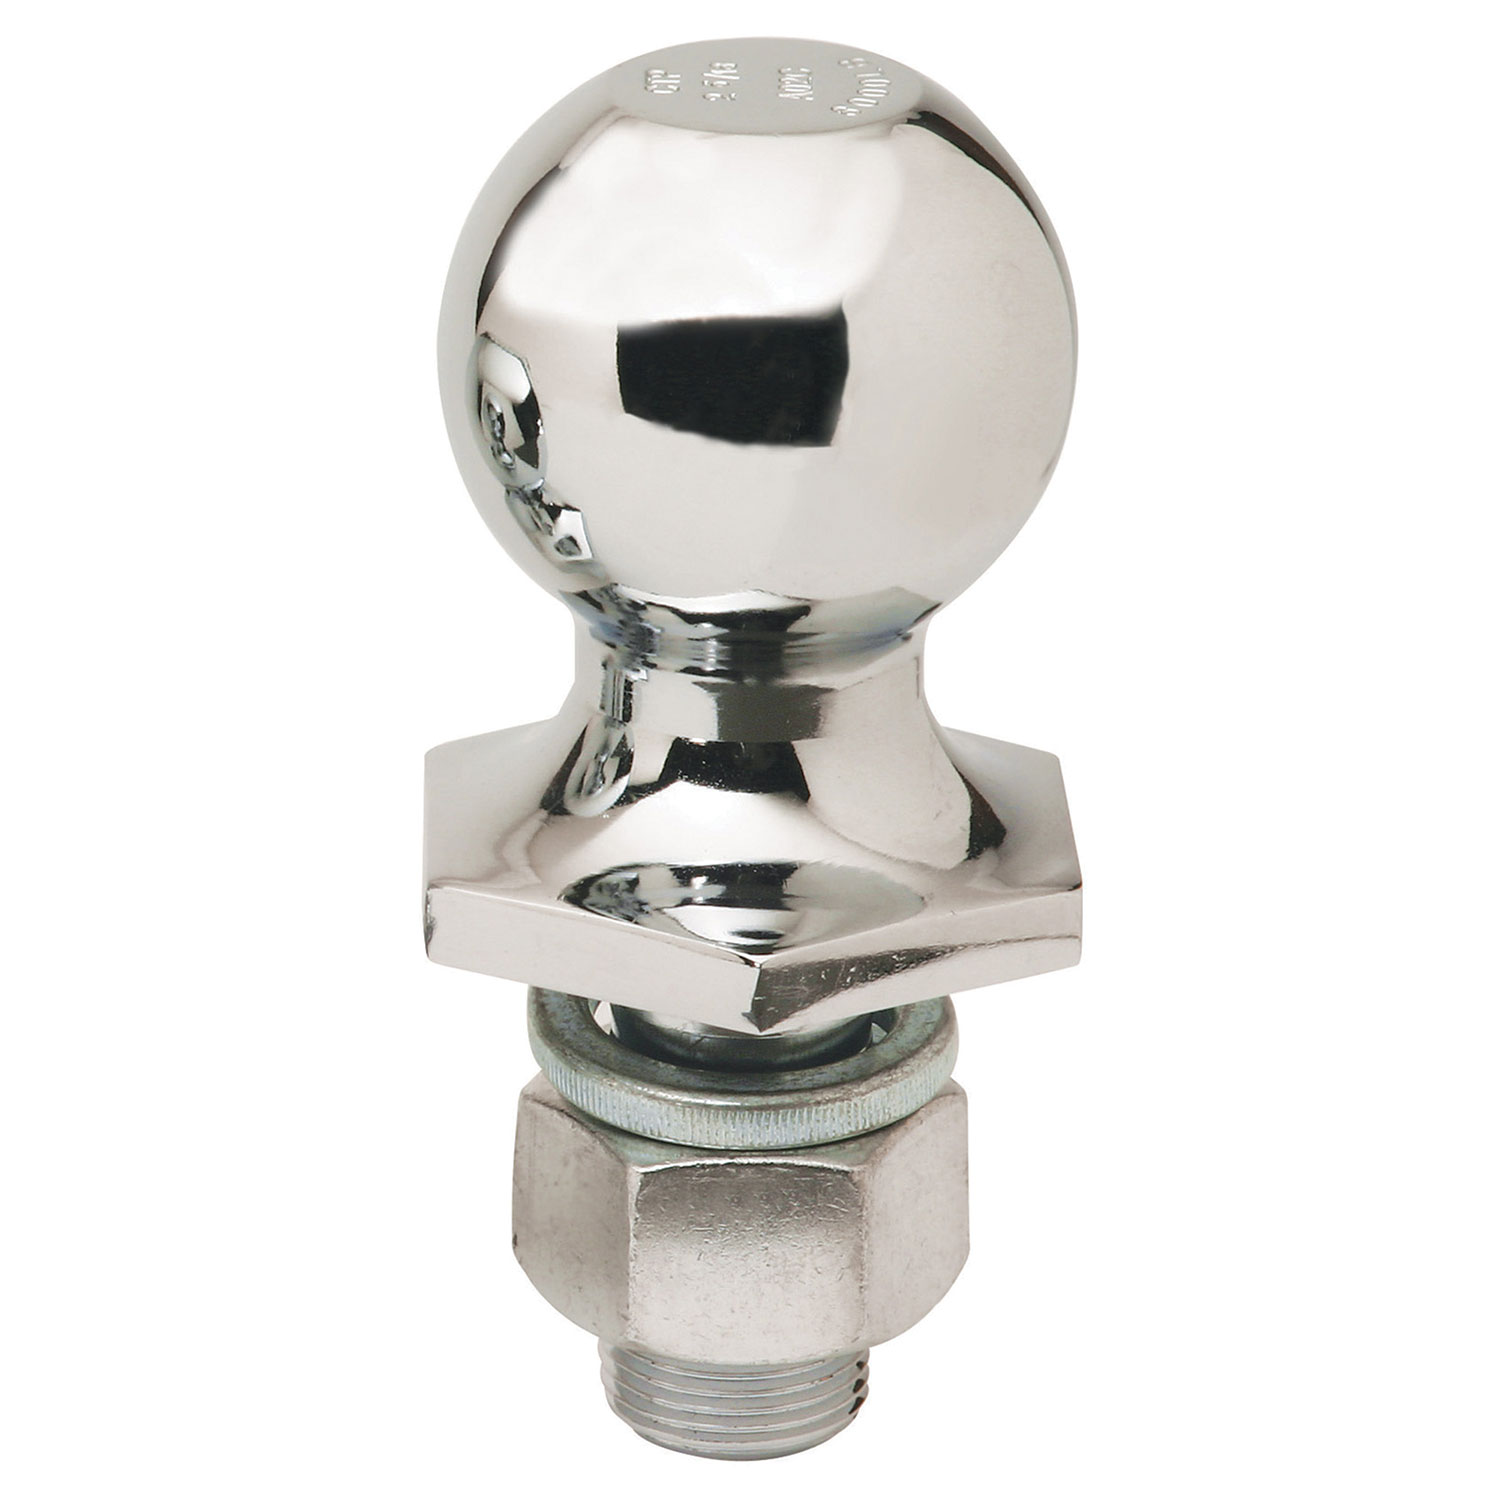 Reese Towpower Interlock  Trailer Hitch Ball, 2-5/16 in. Diameter, 6,000 lbs. Capacity, 1 in. Shank Dia, 2 in. Shank Length, Chrome RT7022311 - image 1 of 2